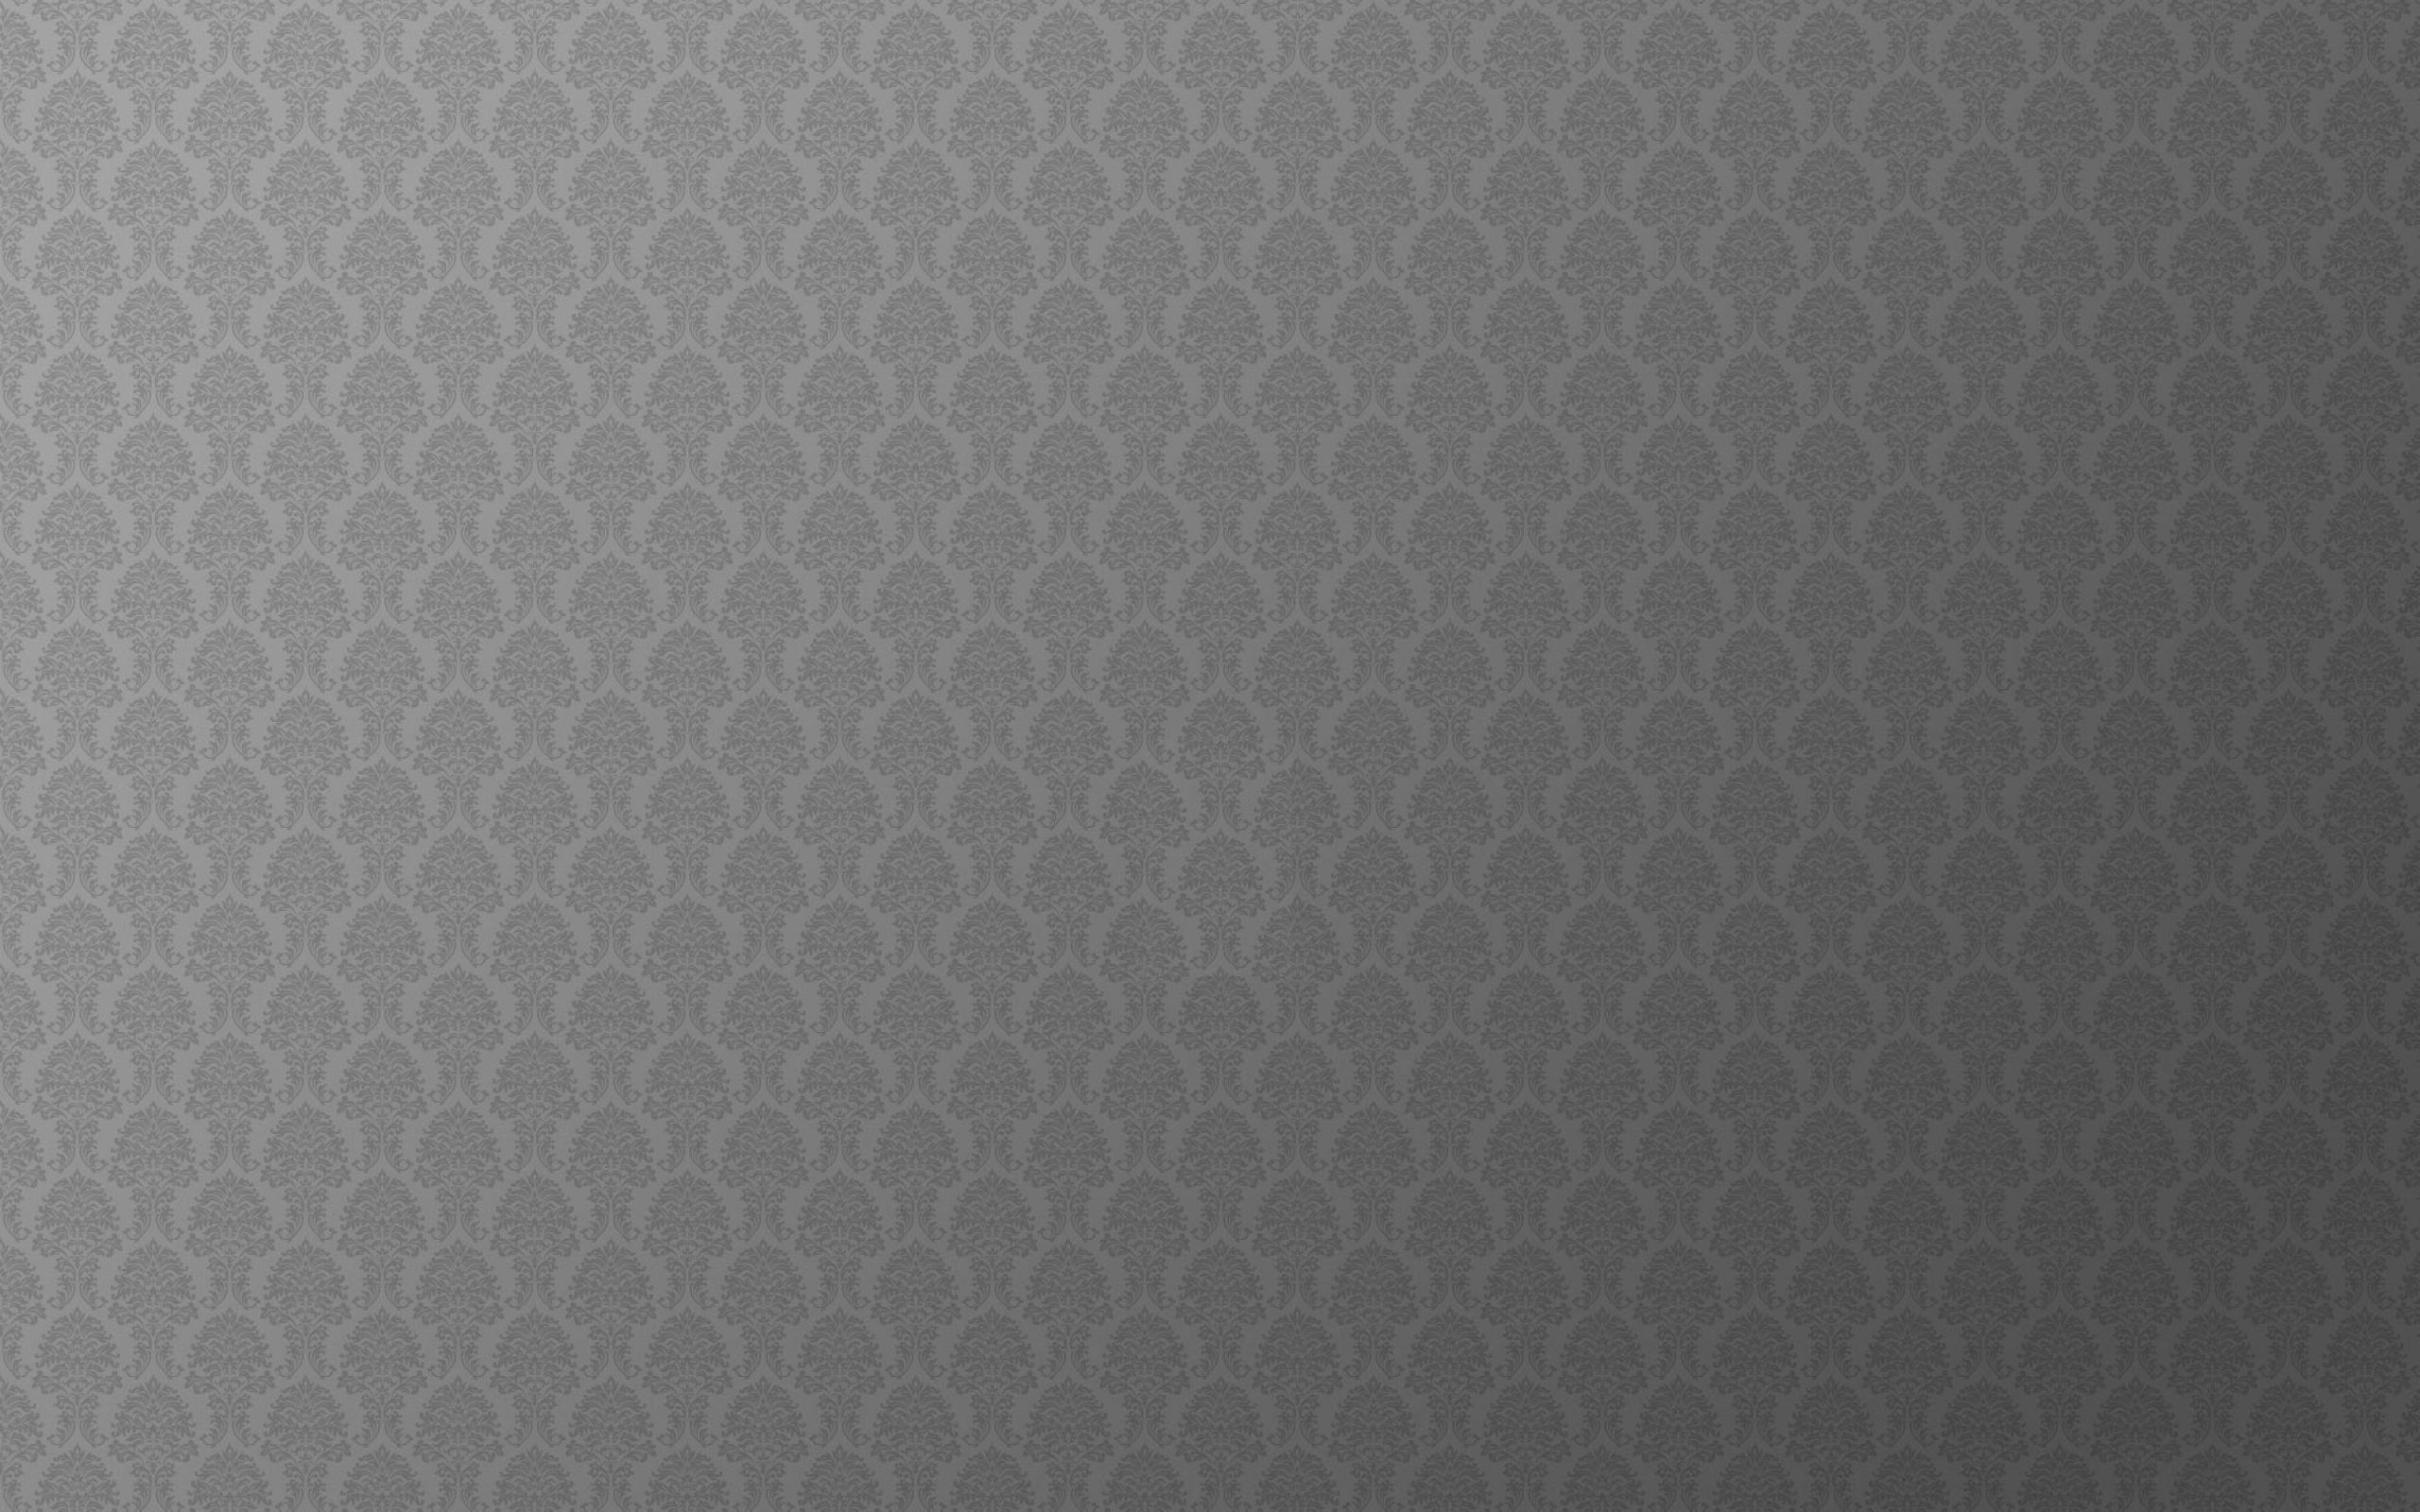 TEMPLATE Background Wallpaper for PowerPoint